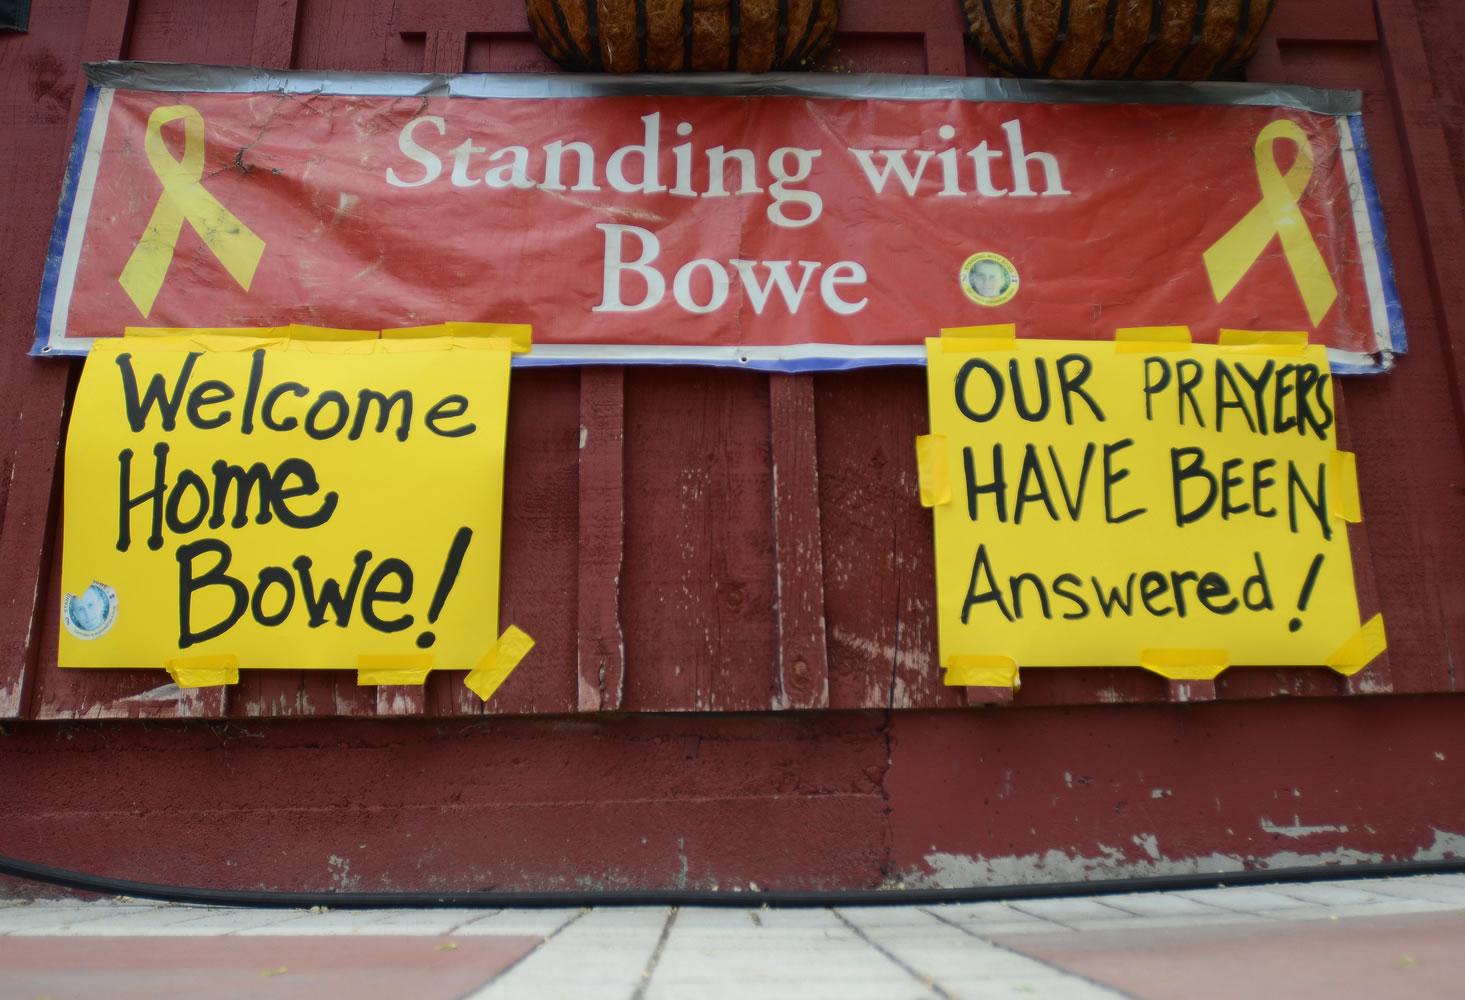 New signs hang at Zaney's coffee house in Hailey, Idaho on Saturday after the announcement that U.S. Army Sgt. Bowe Bergdahl has been released from captivity. Bergdahl, 28, had been held prisoner by the Taliban since June 30, 2009. He was handed over to U.S.